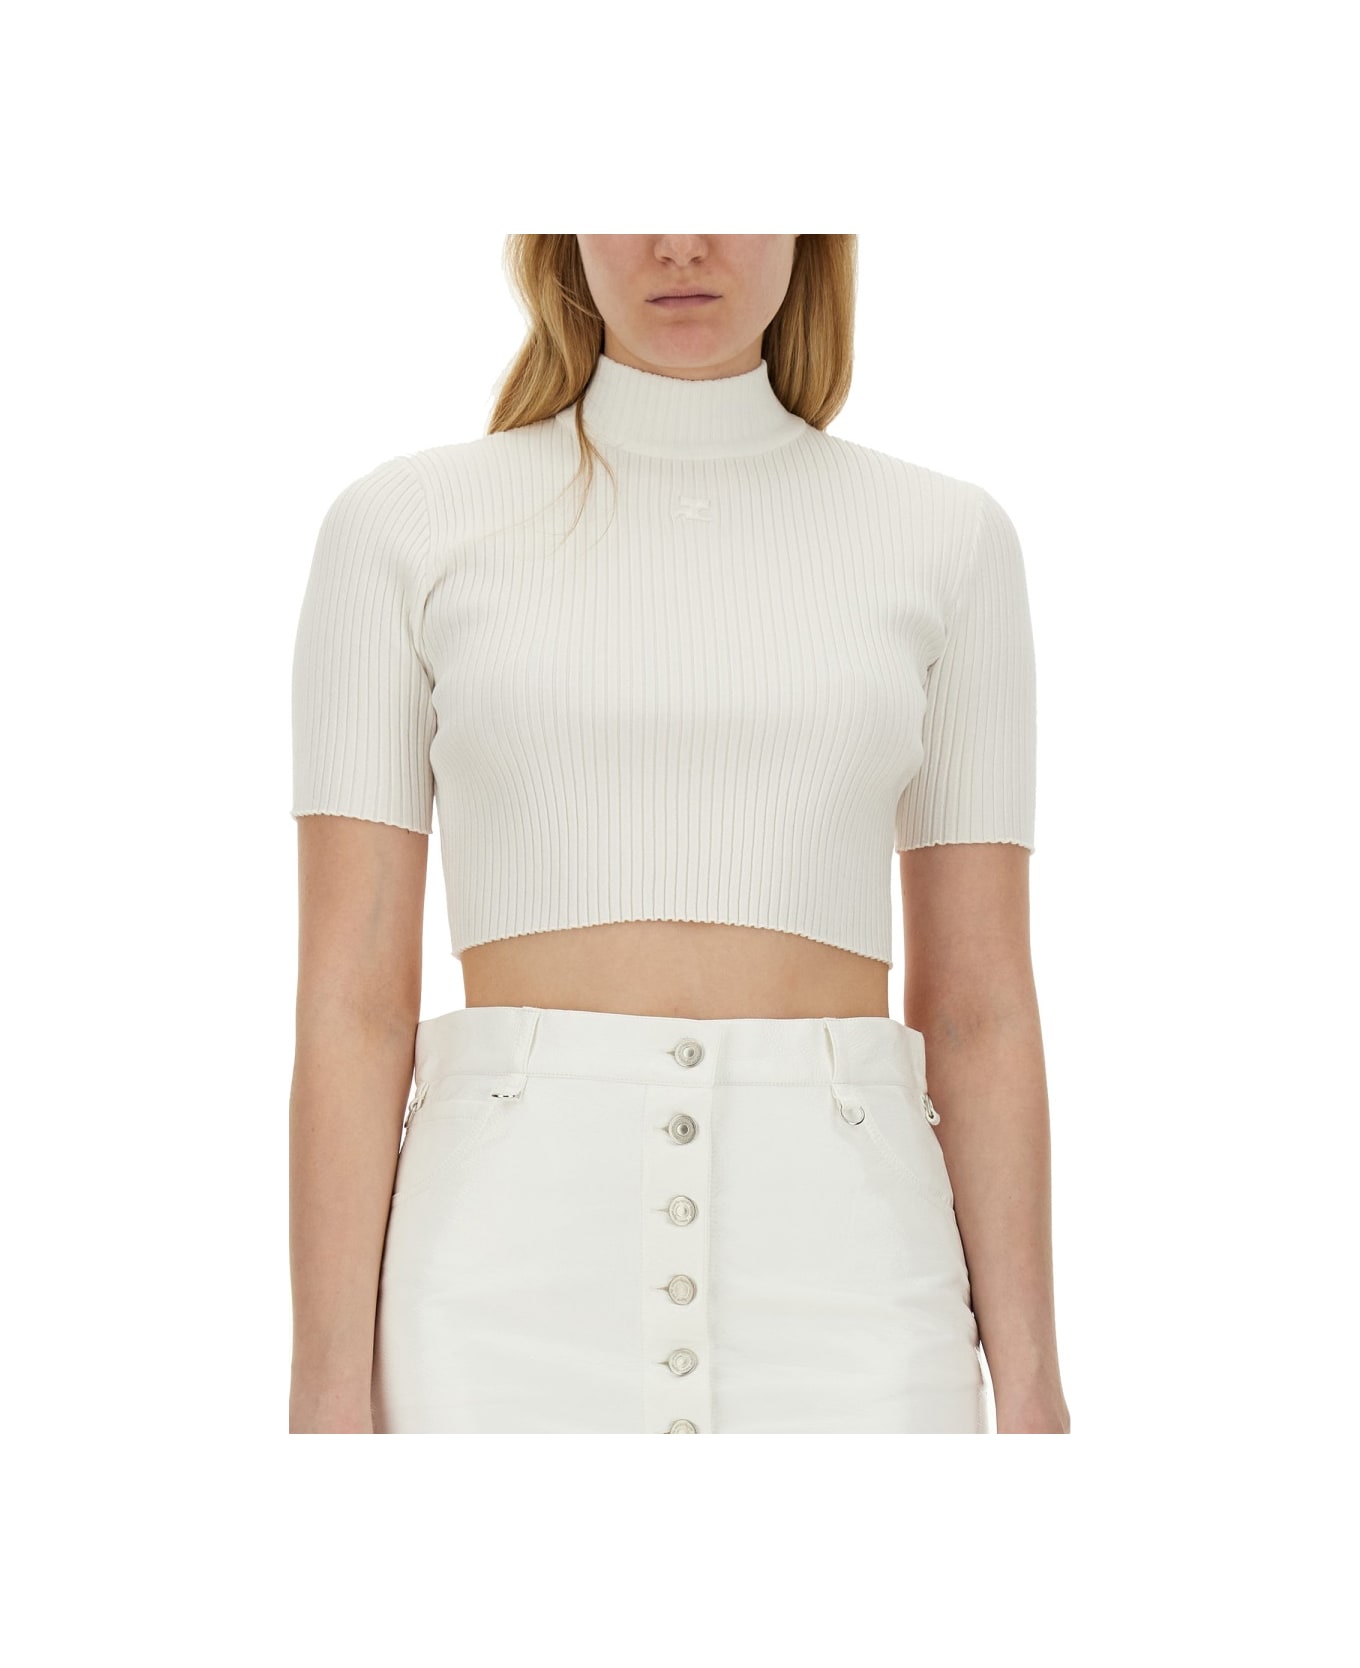 Courrèges Top Cropped - WHITE ニットウェア